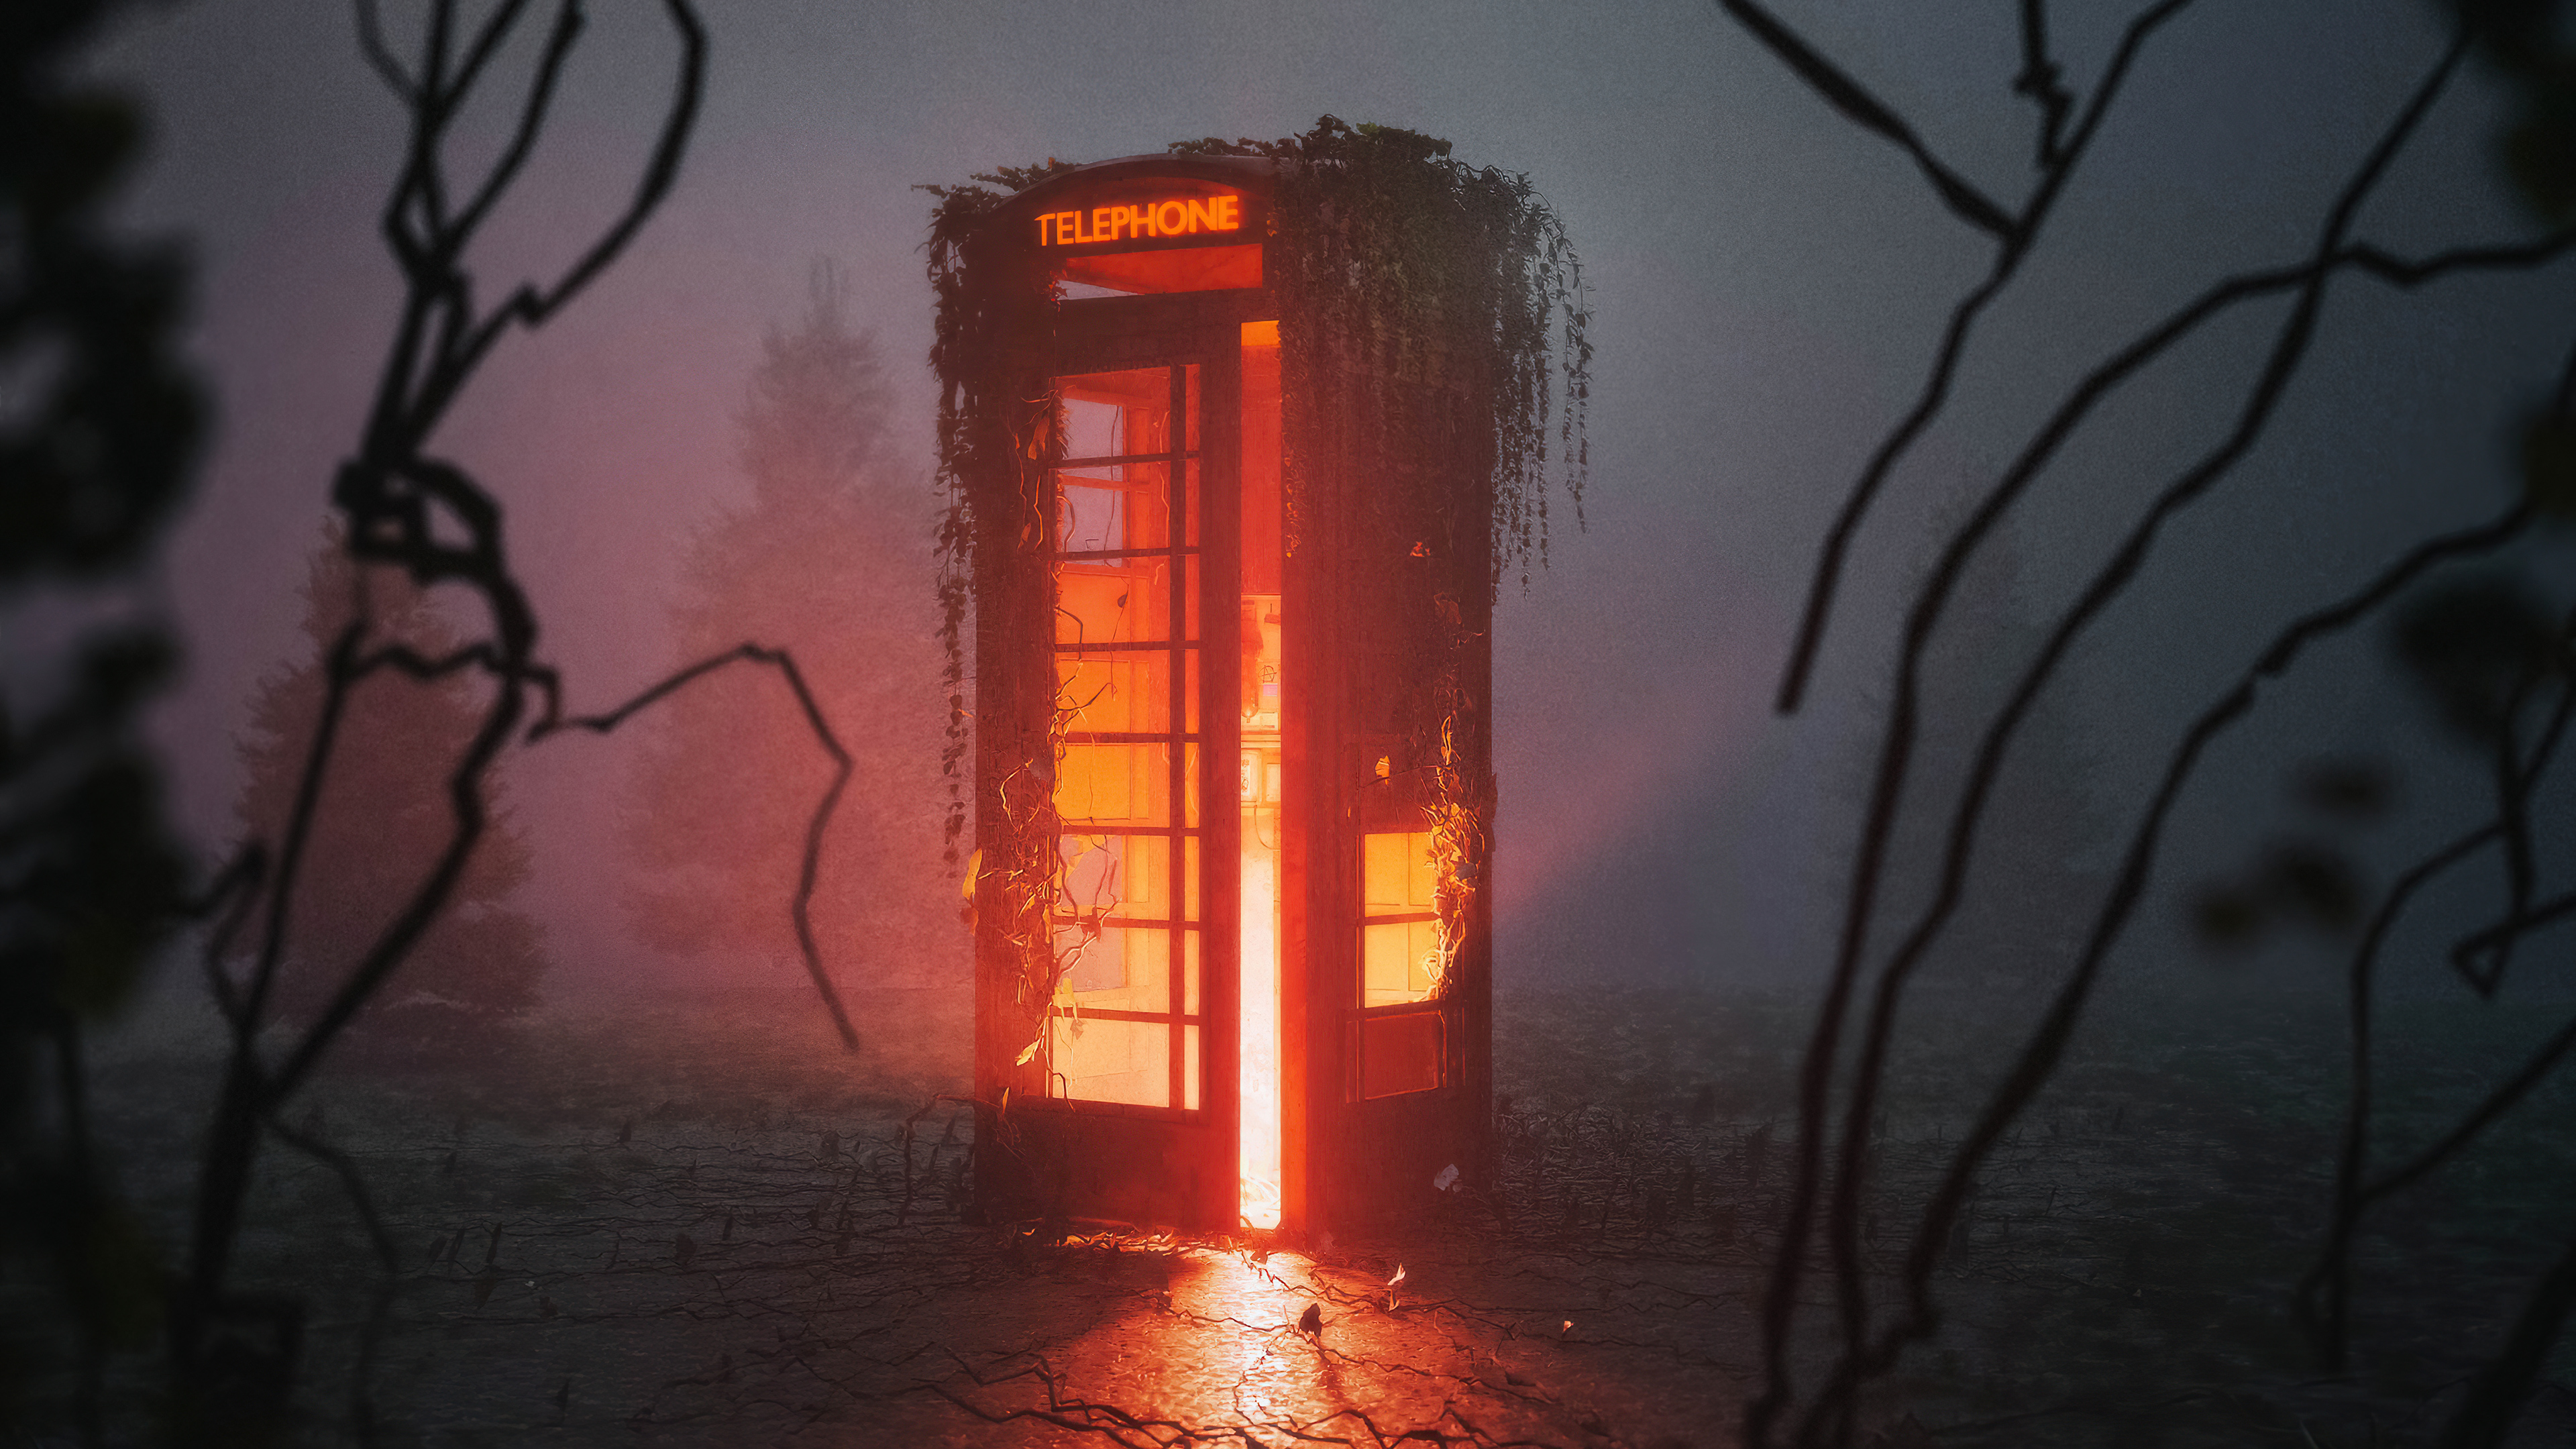 Telephone booth k hd artist k wallpapers images backgrounds photos and pictures